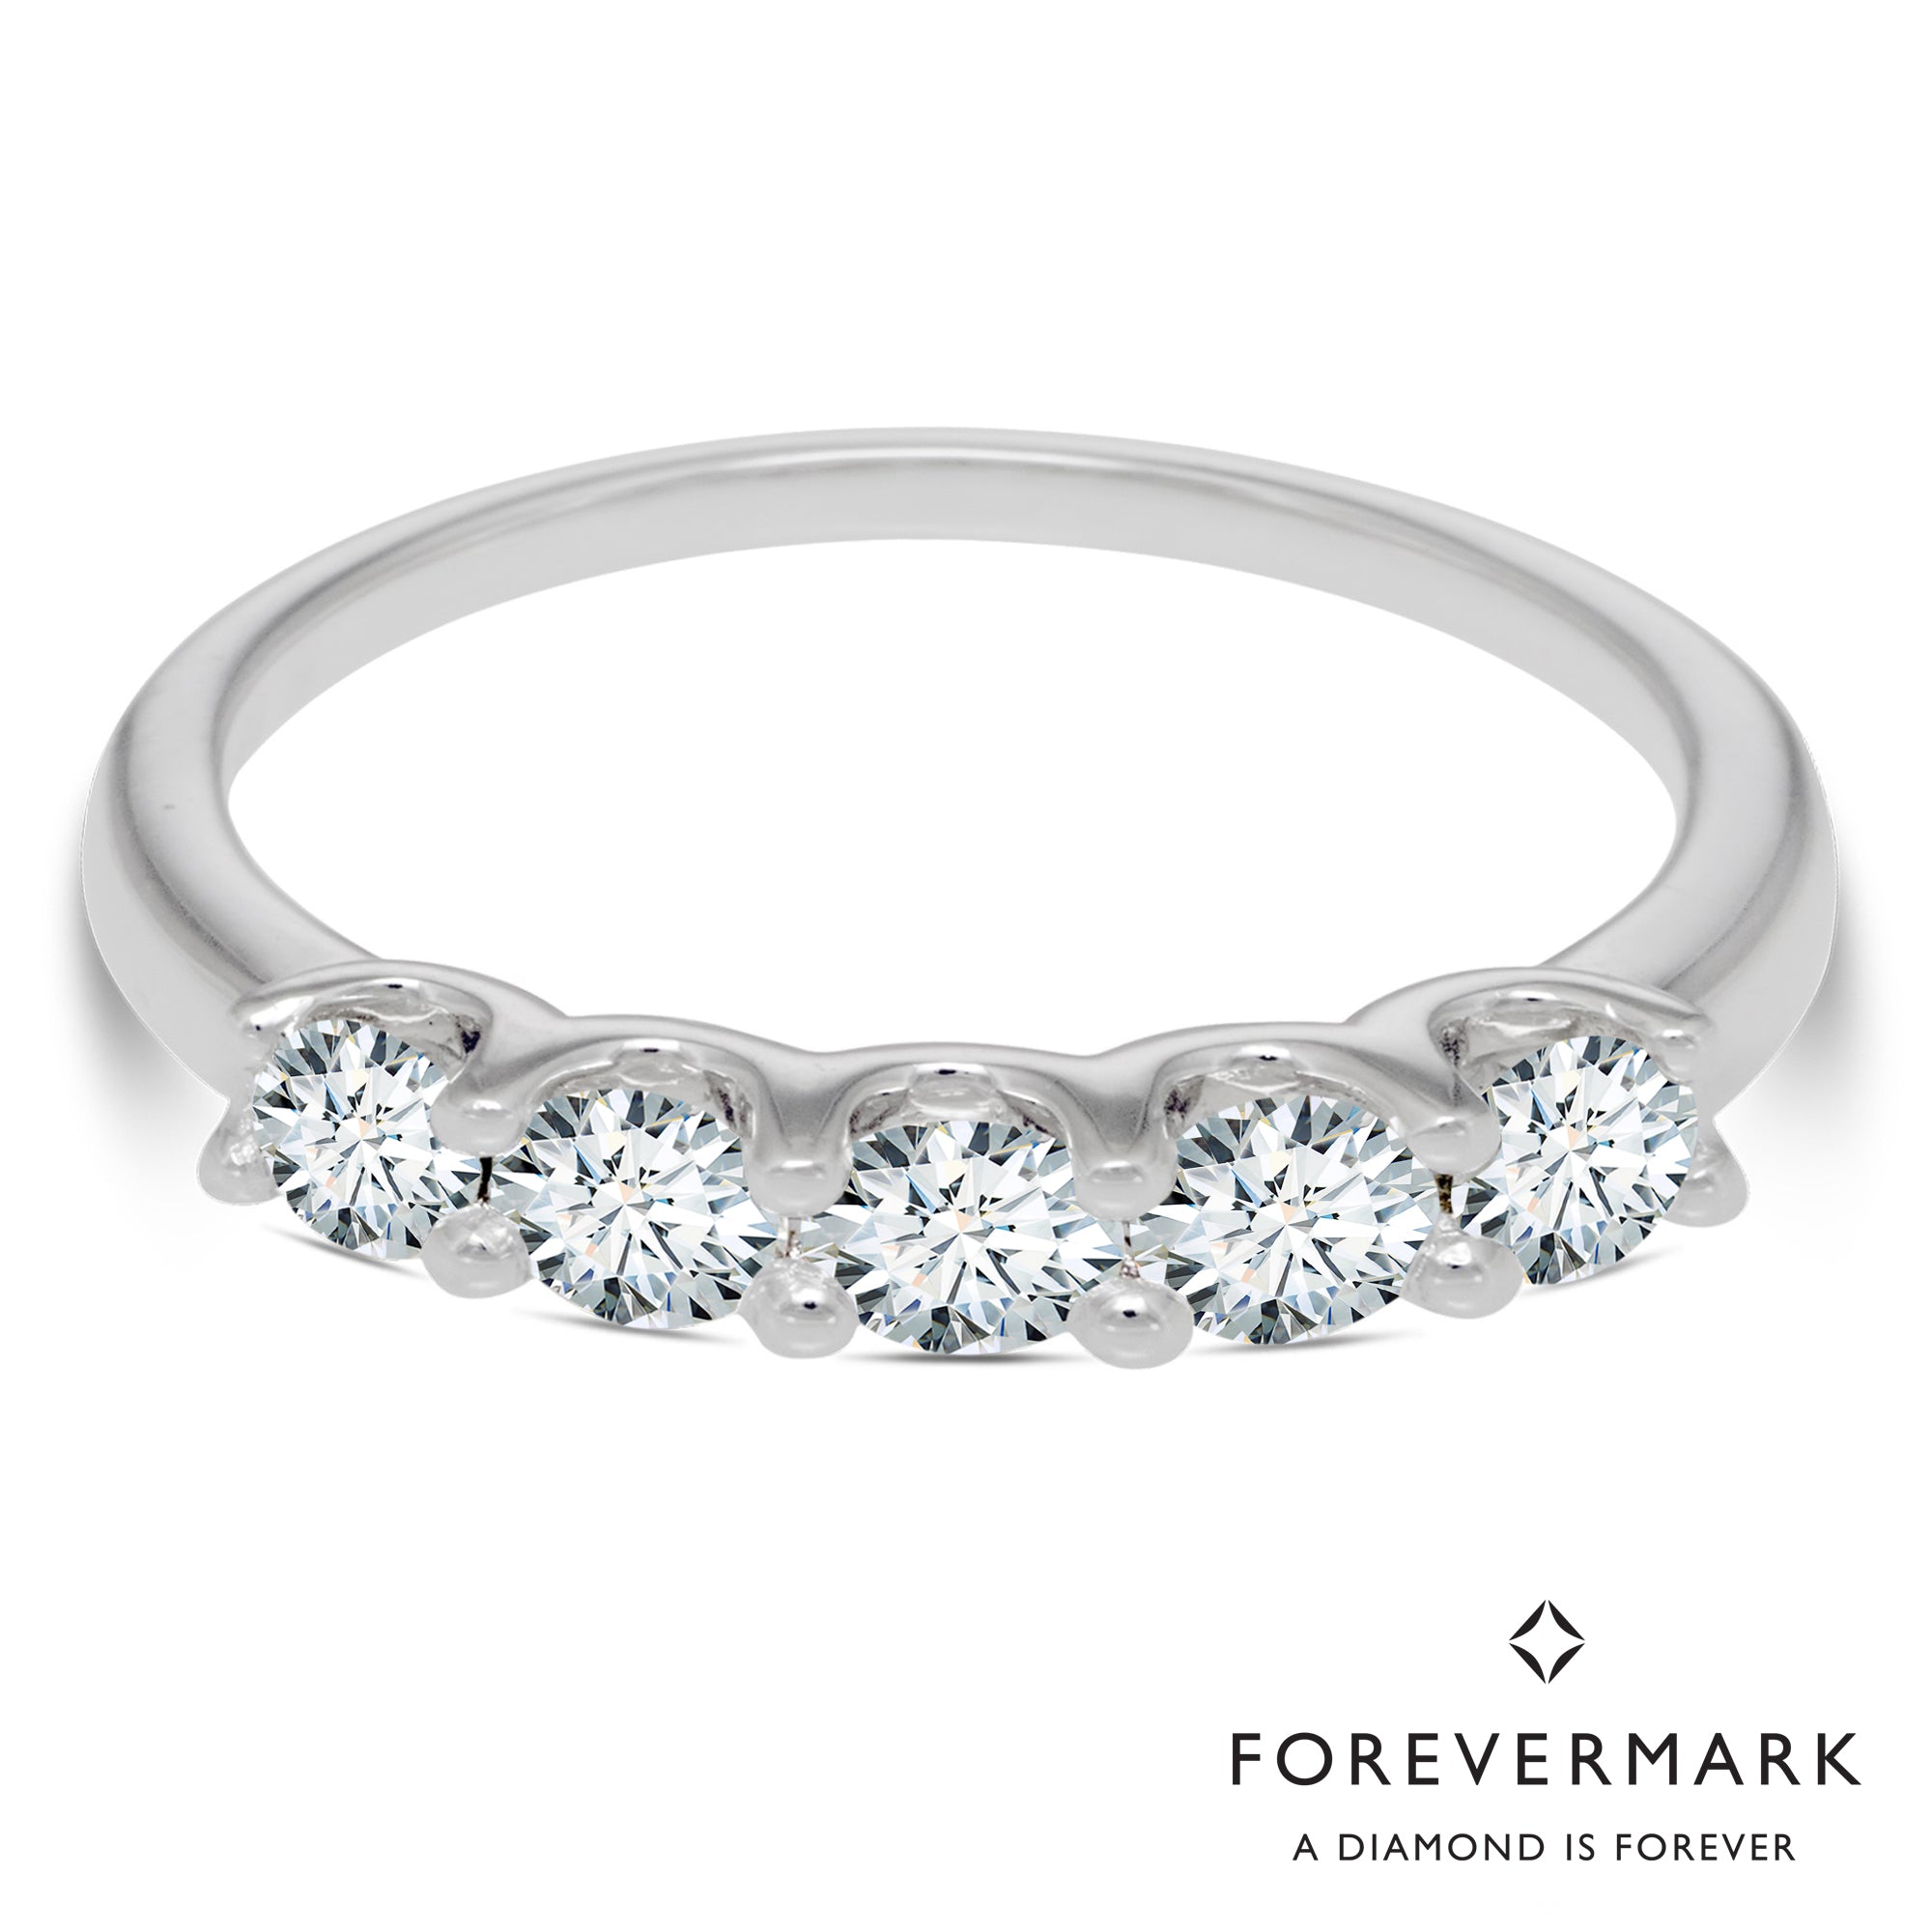 De Beers Forevermark Diamond Wedding Band in 18kt White Gold (3/4ct tw)